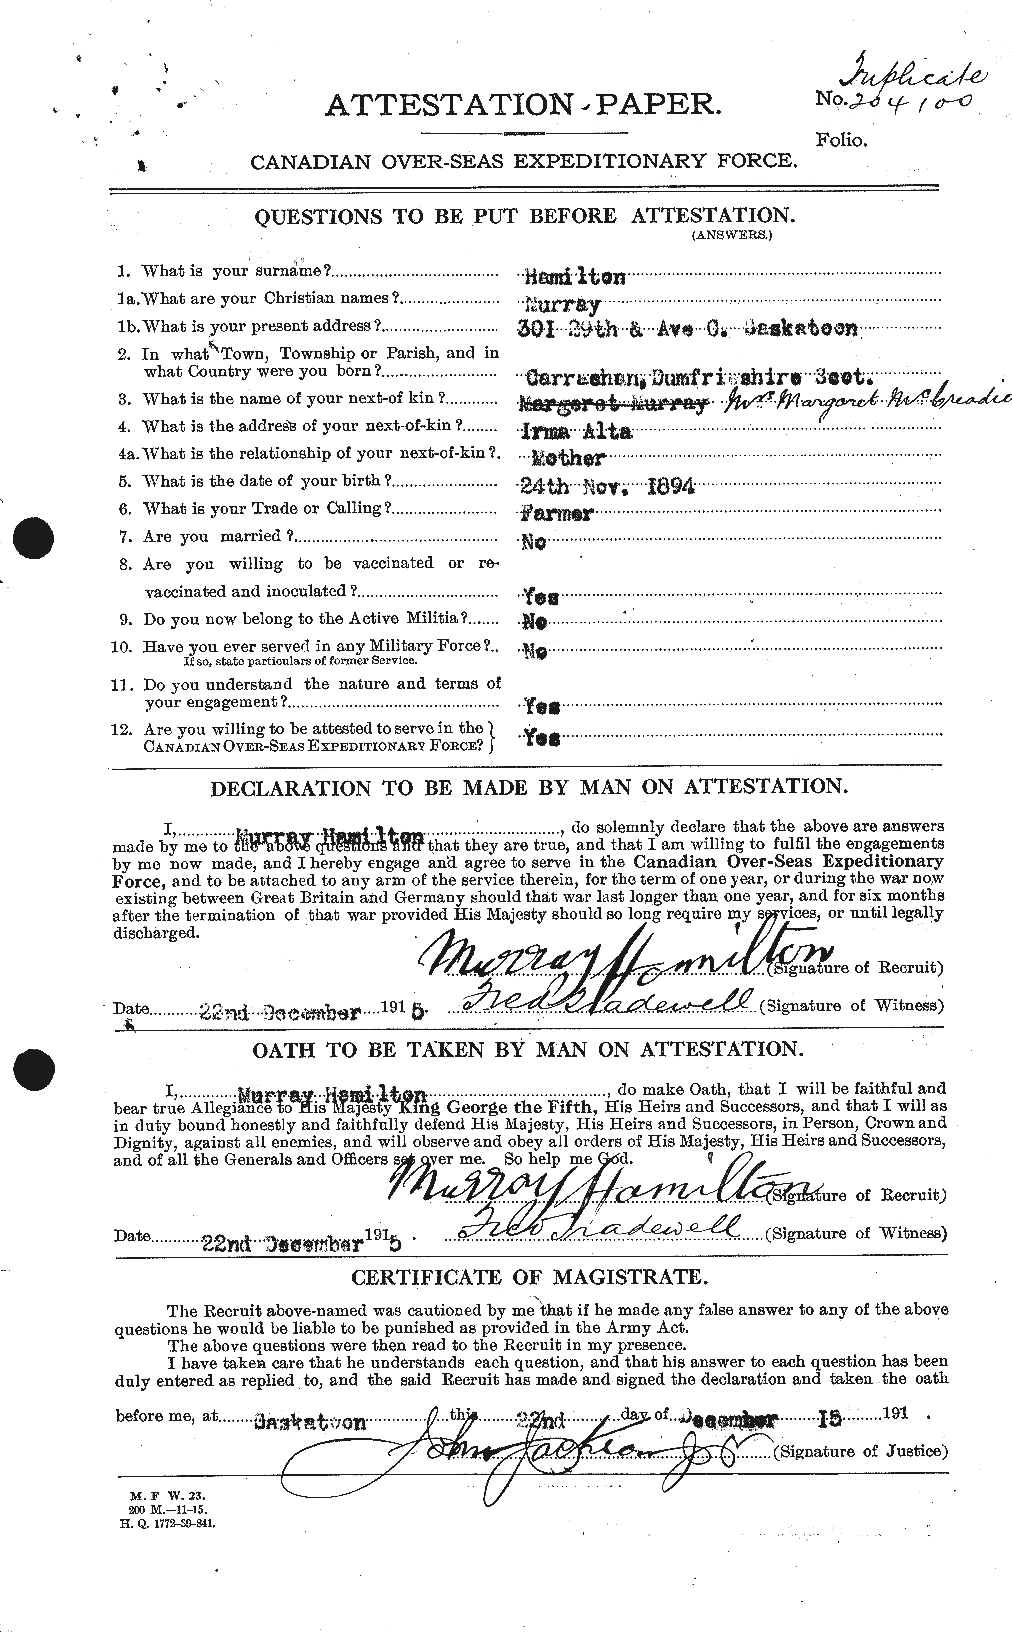 Personnel Records of the First World War - CEF 373187a